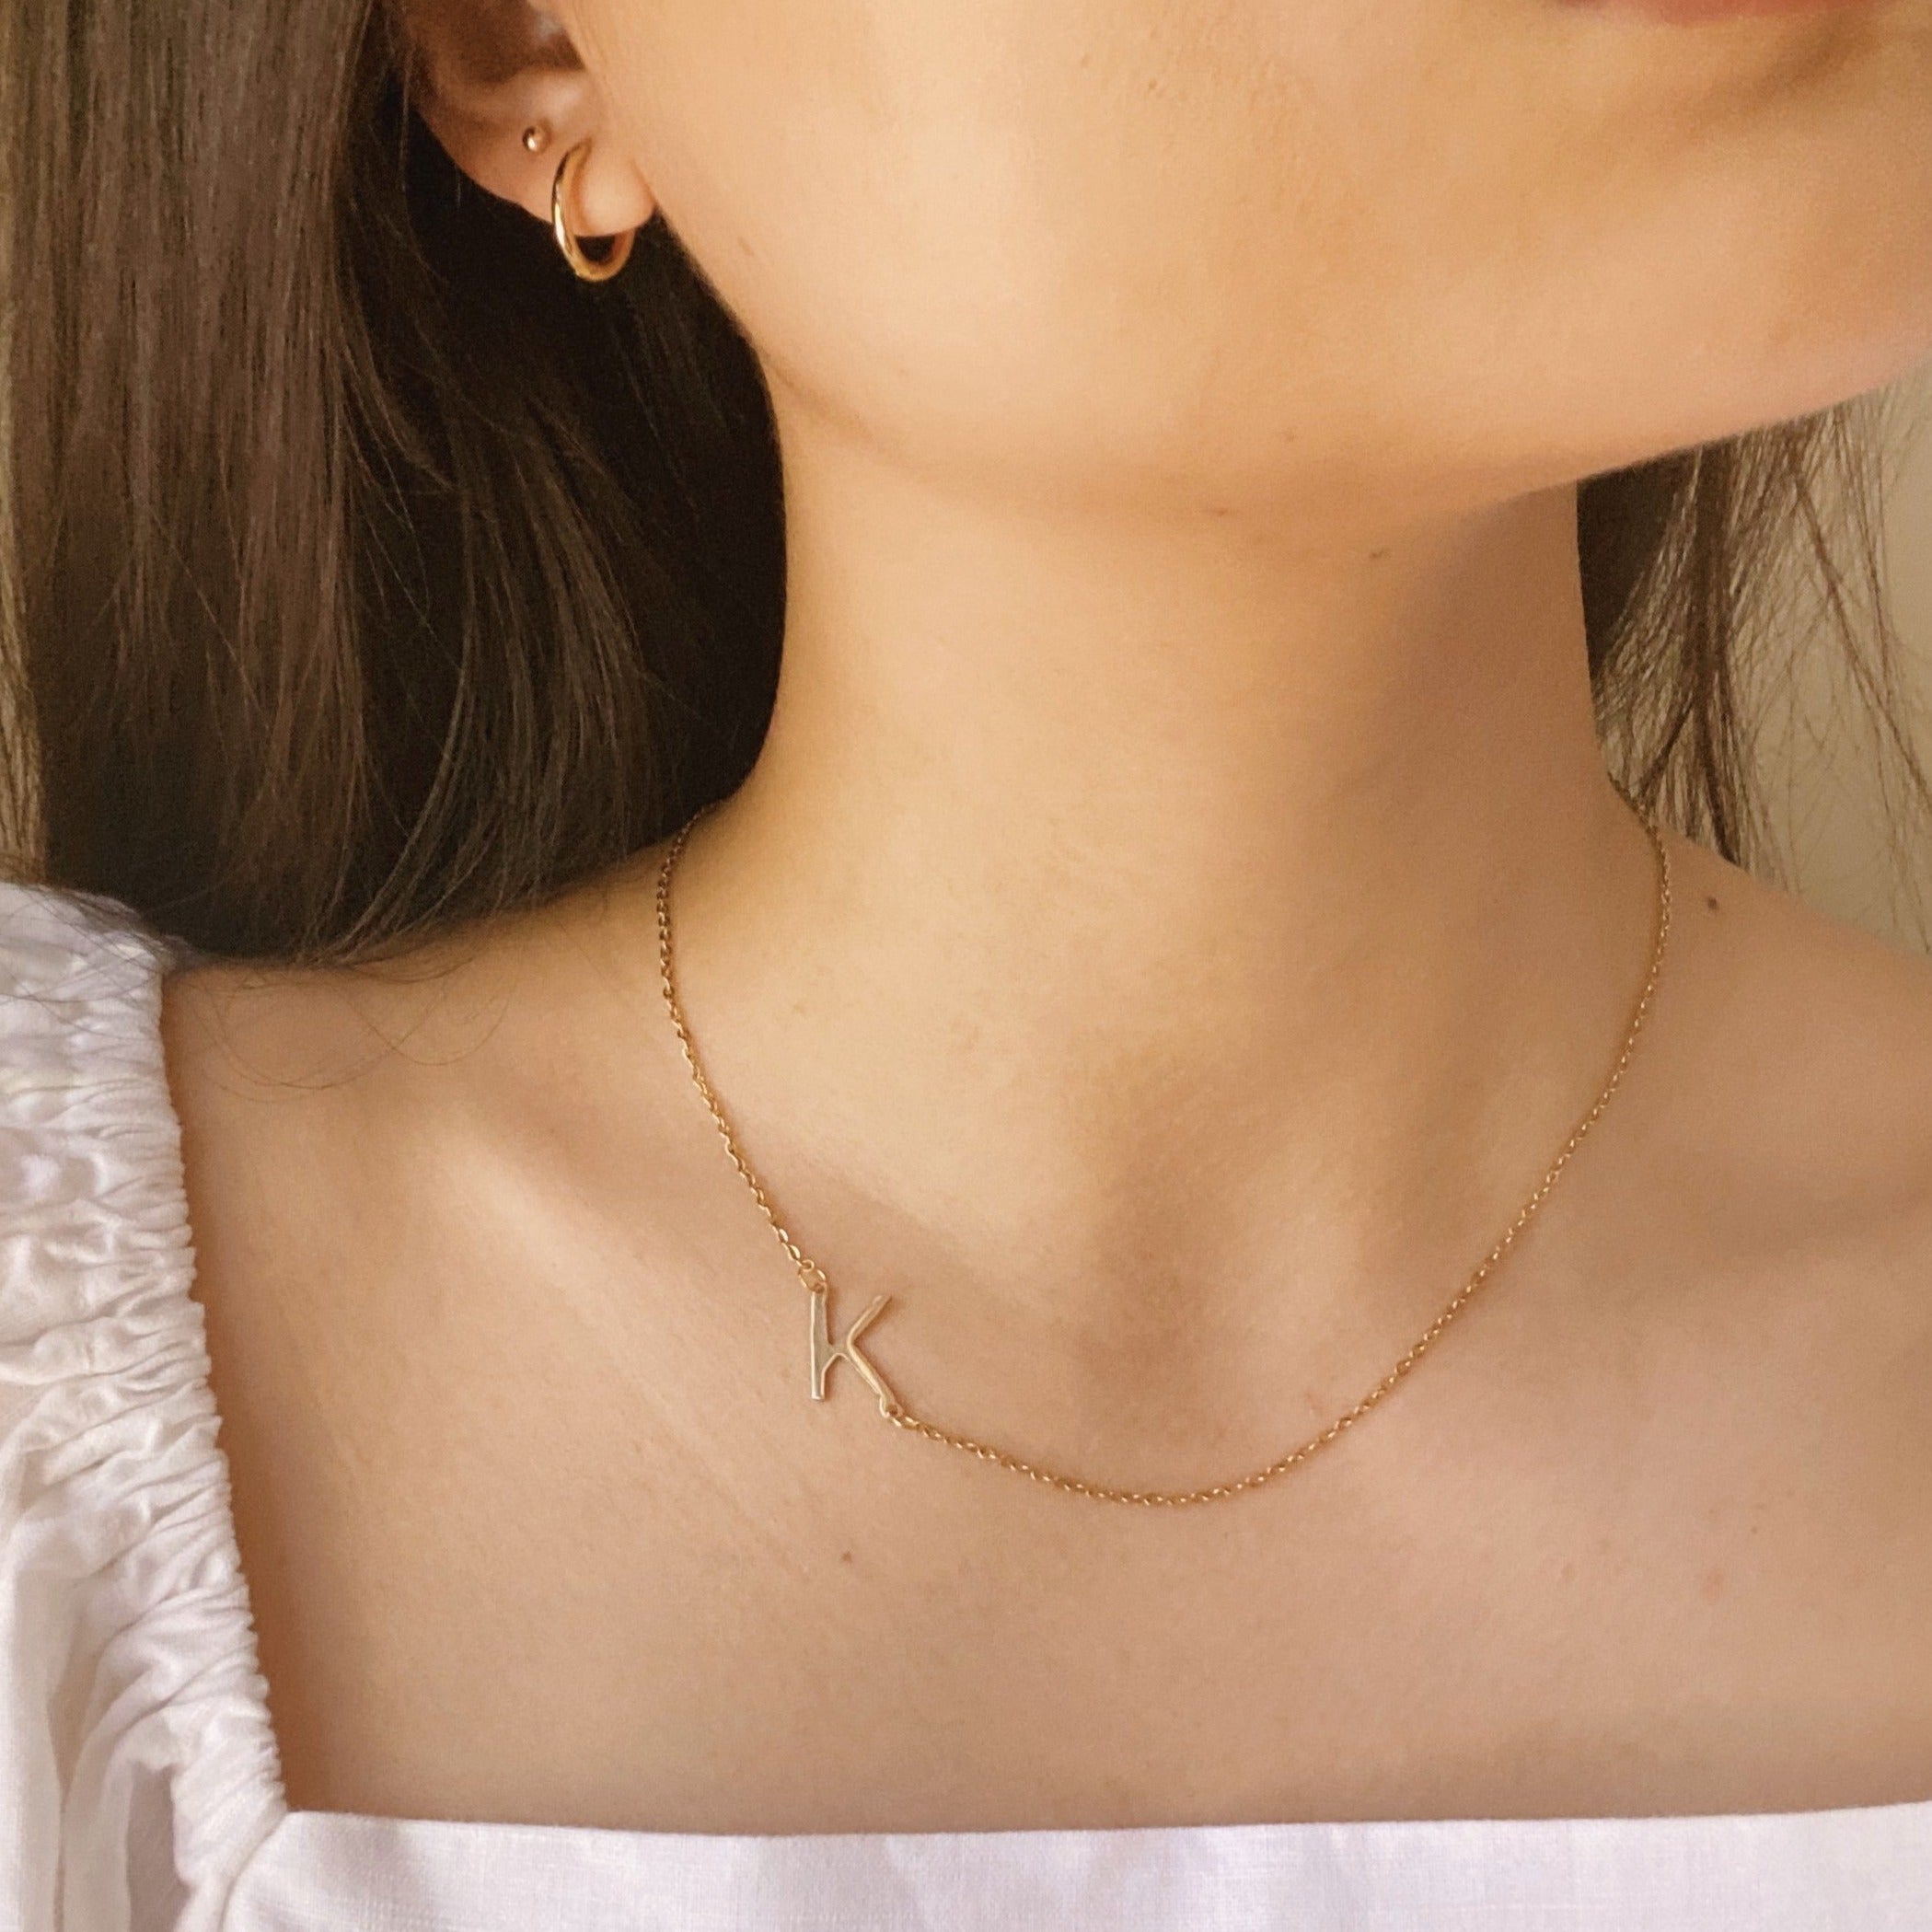 *PRE-ORDER Sideways Initial Gold Filled Necklace